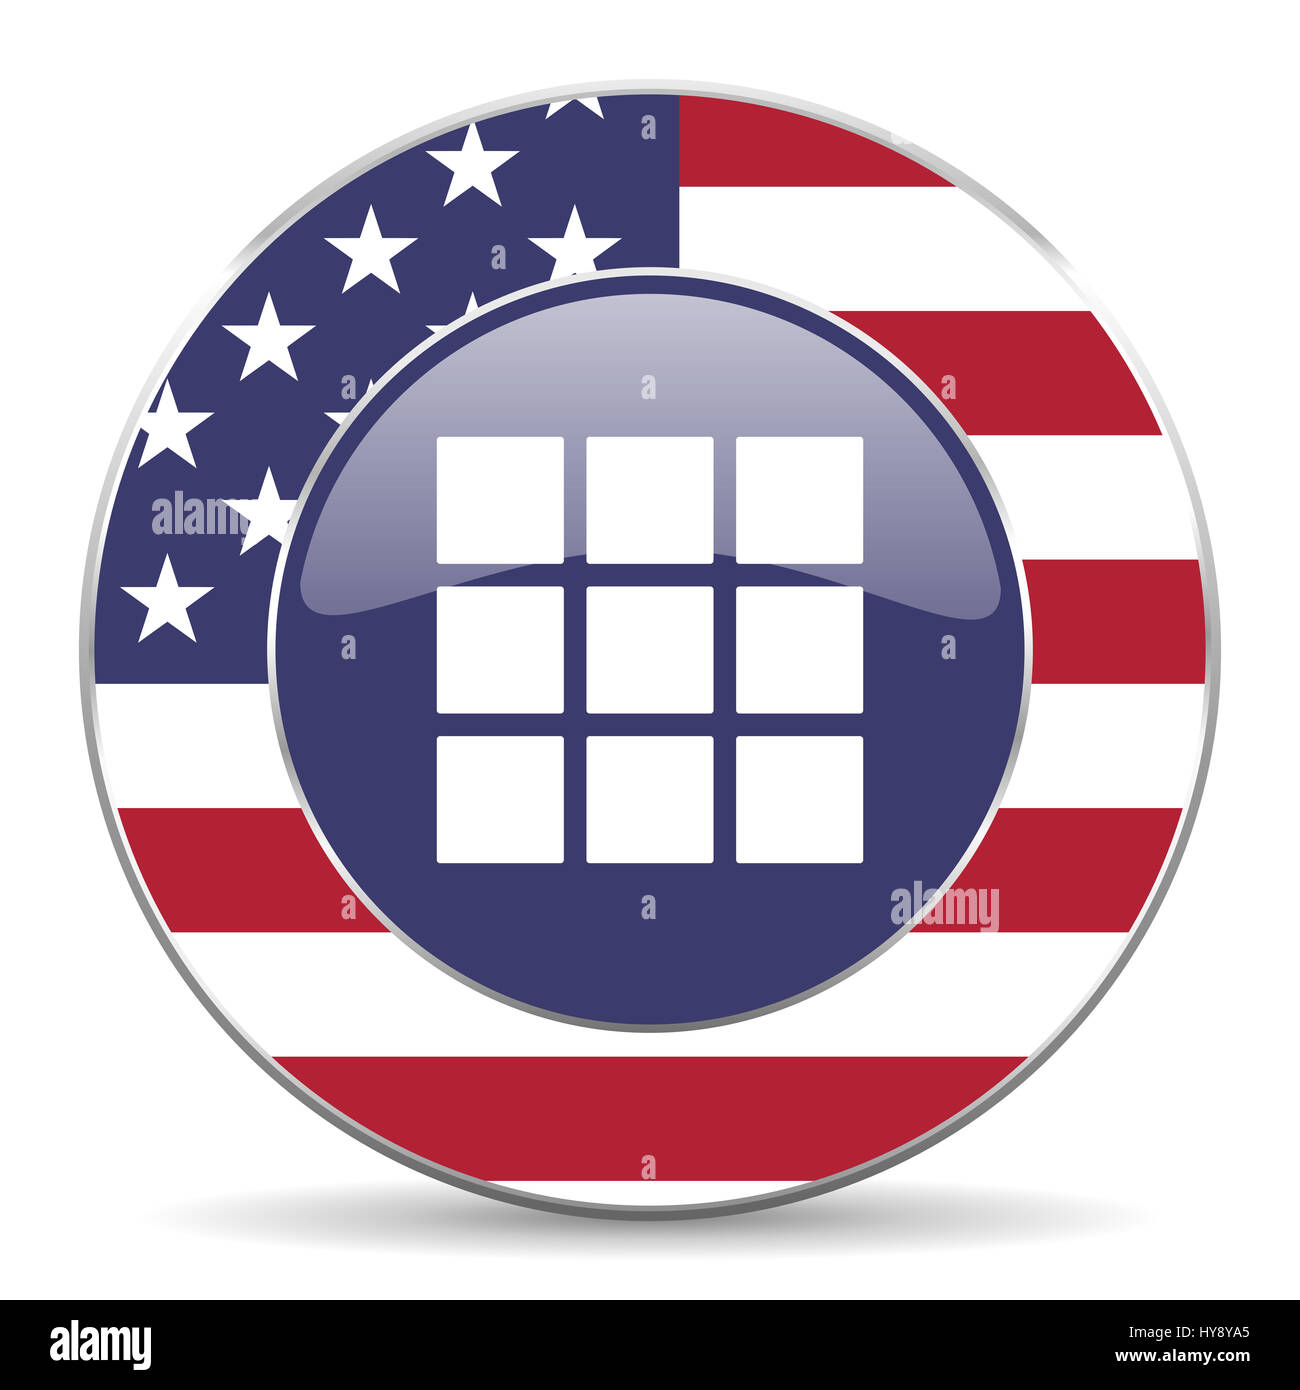 Thumbnails grid usa design web american round internet icon with shadow on white background. Stock Photo